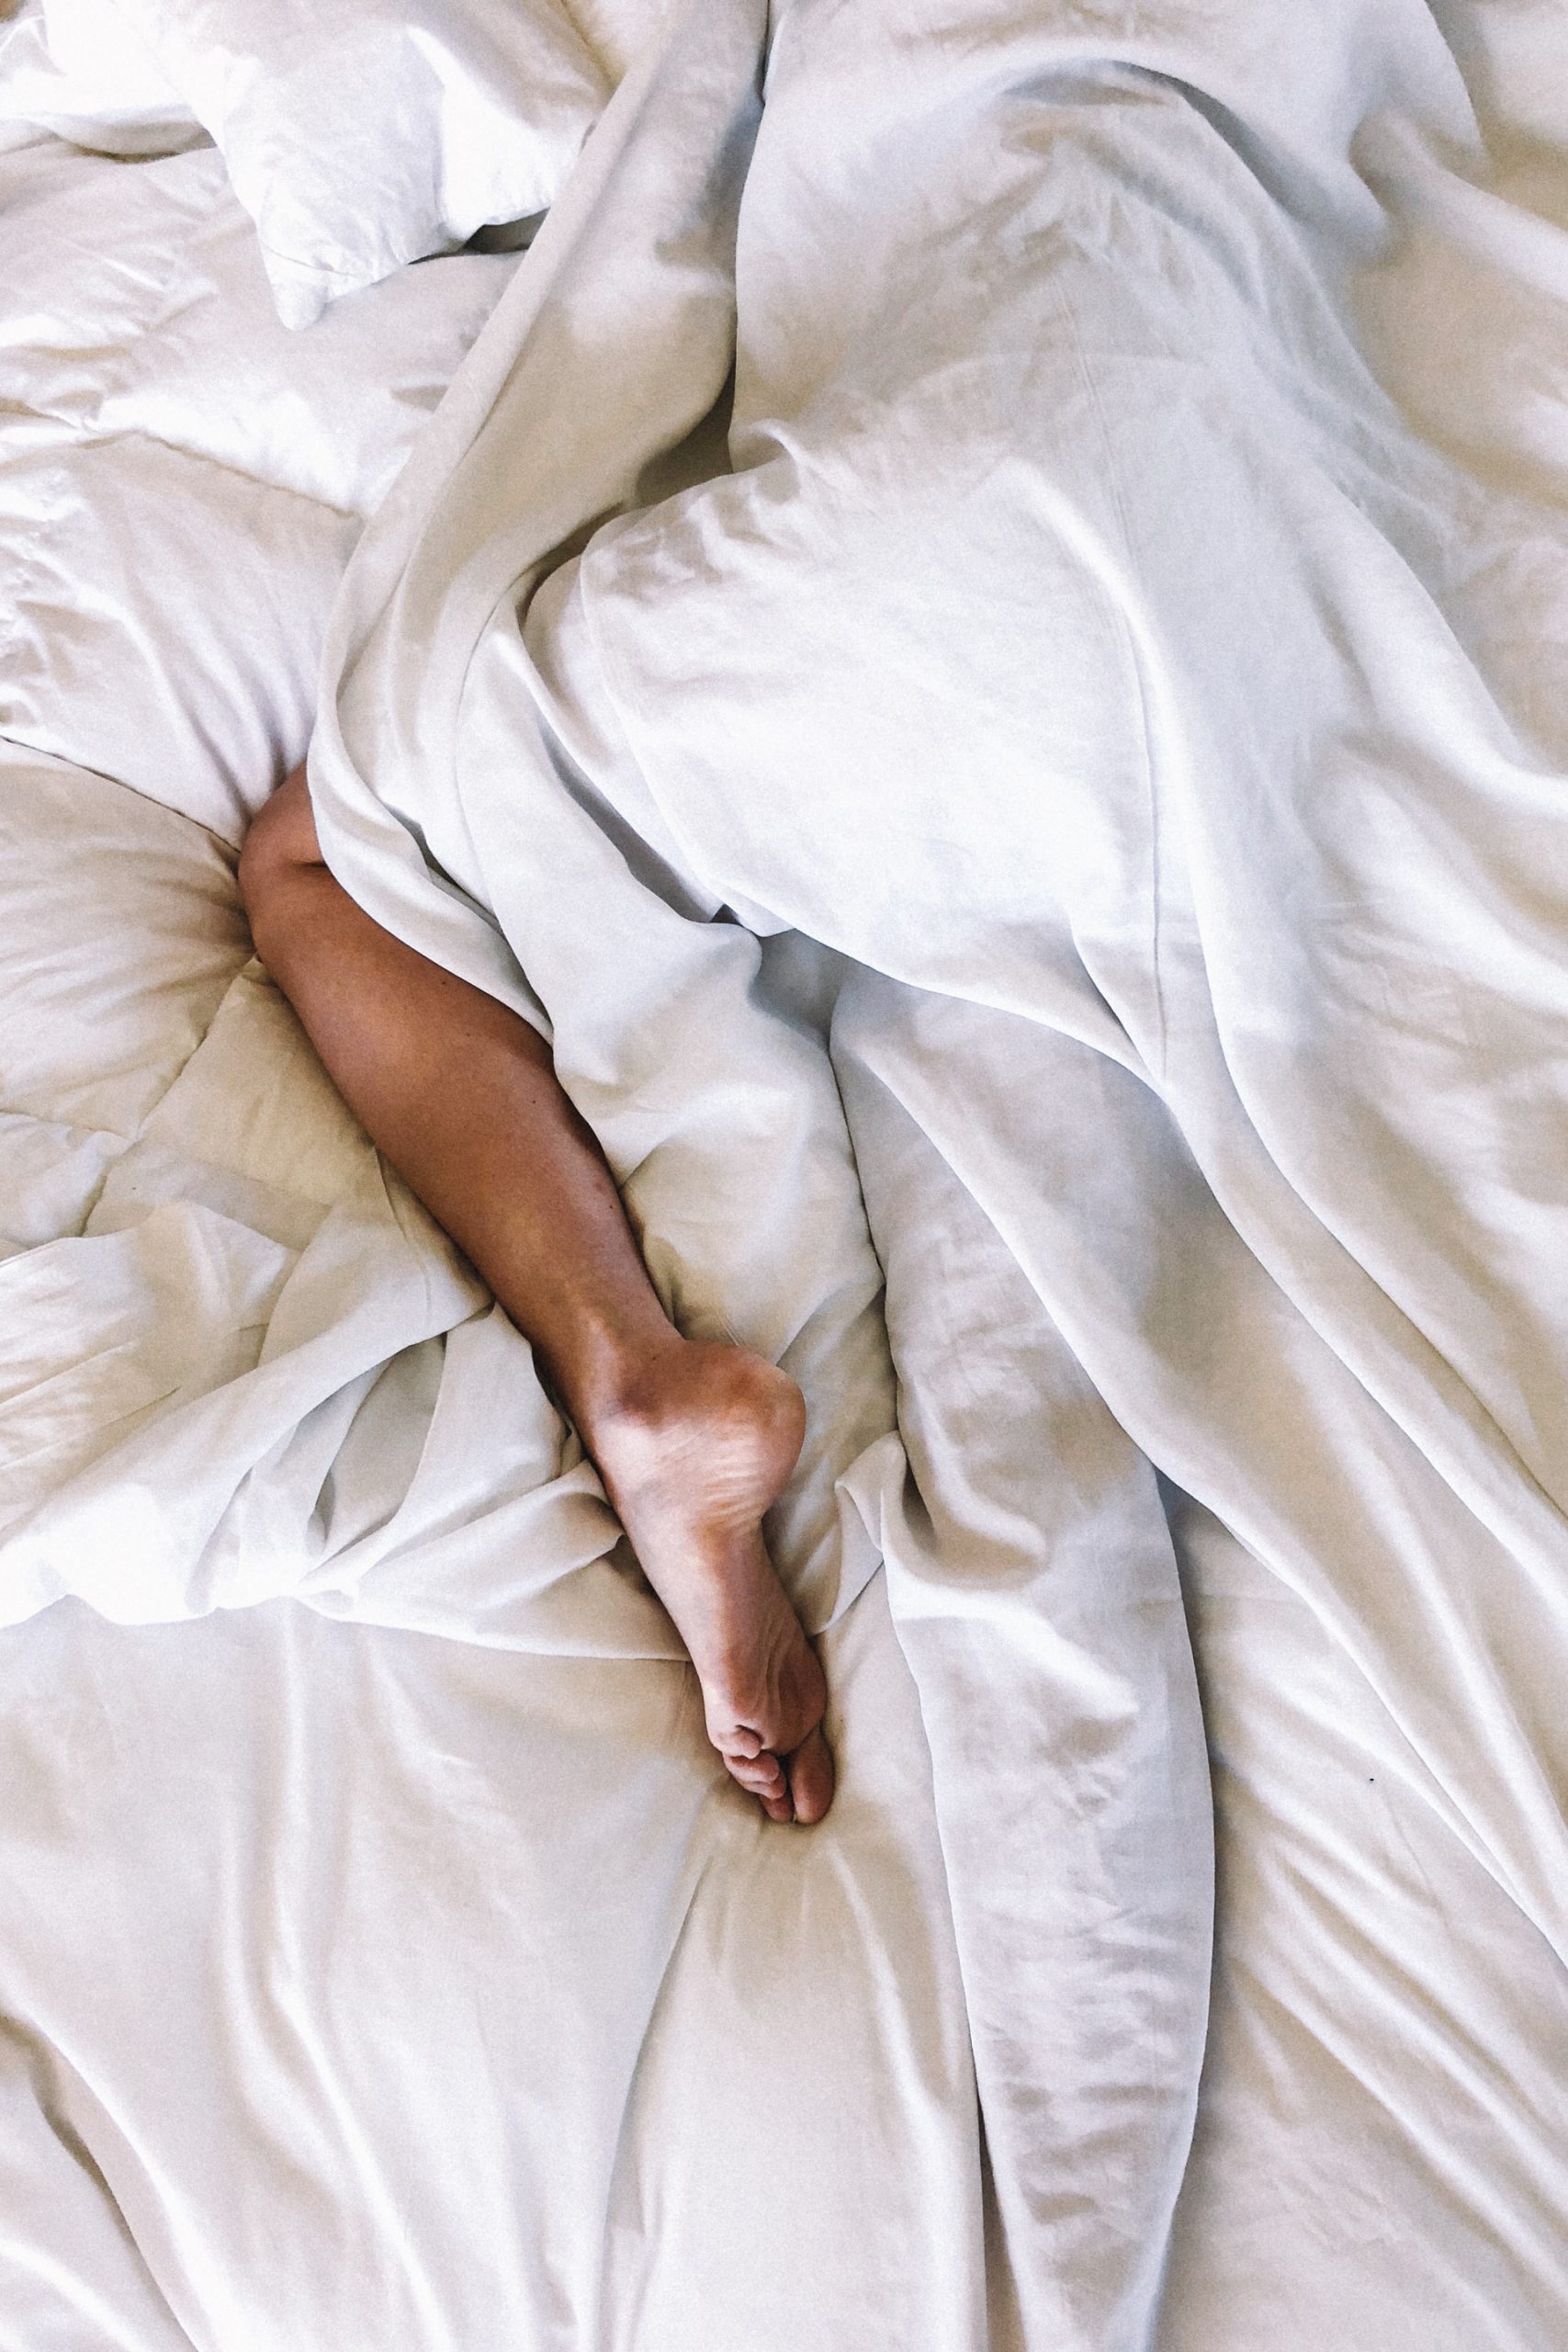 You are currently viewing Struggling to Sleep? Here’s 4 Tips to Help You Catch Some Zzzz’s